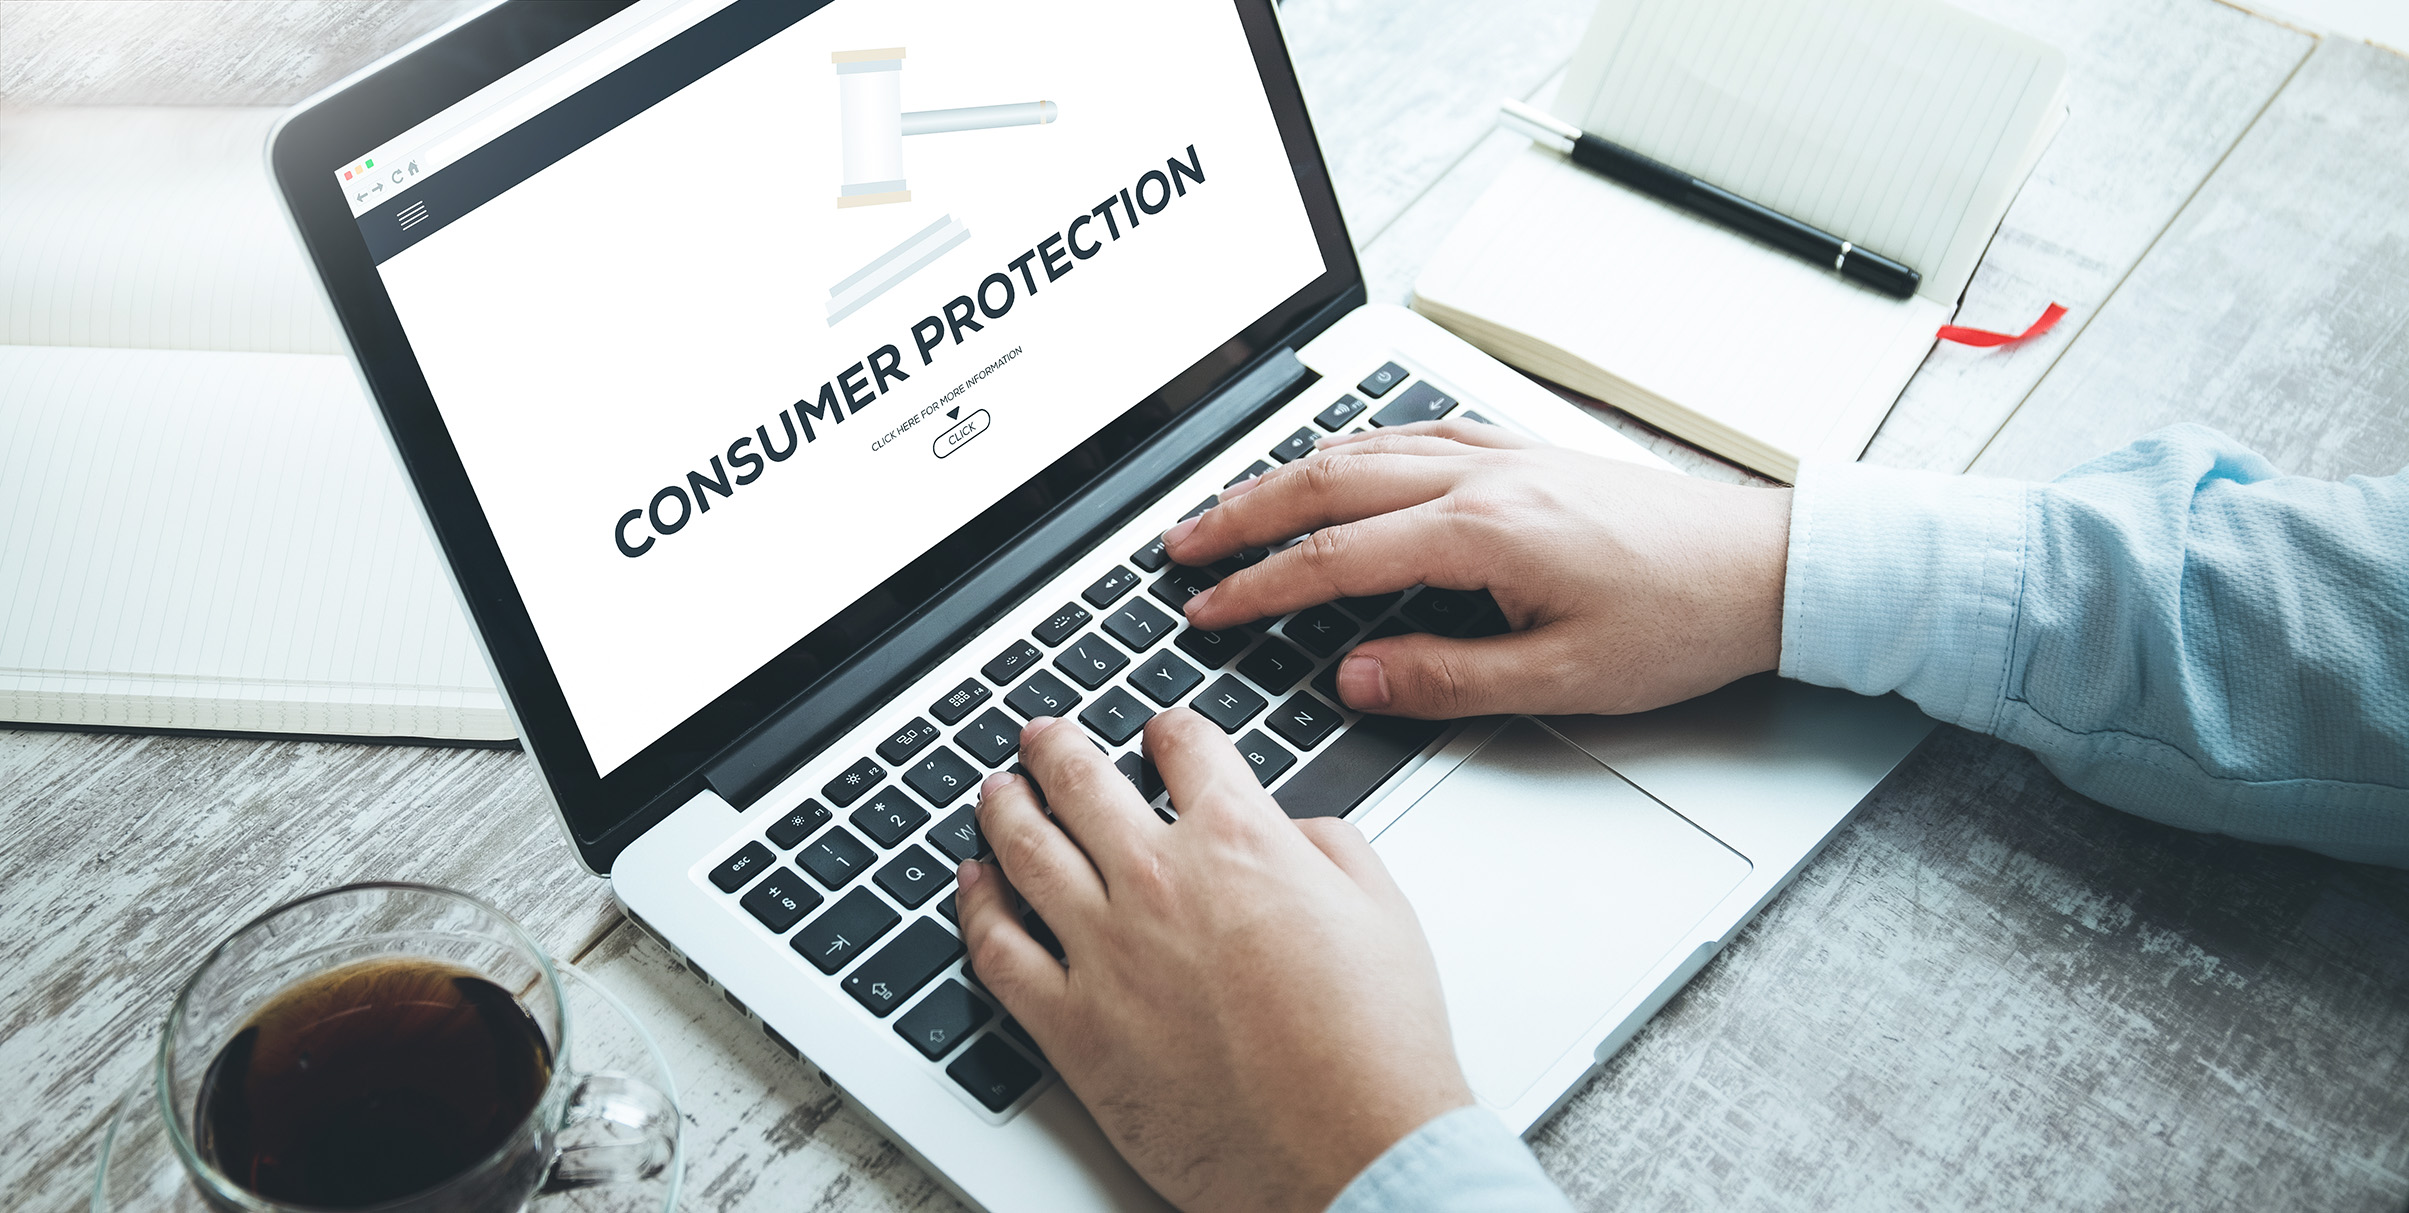 Someone's hands are resting on a laptop keyboard while the screen reads: "Consumer Protection"